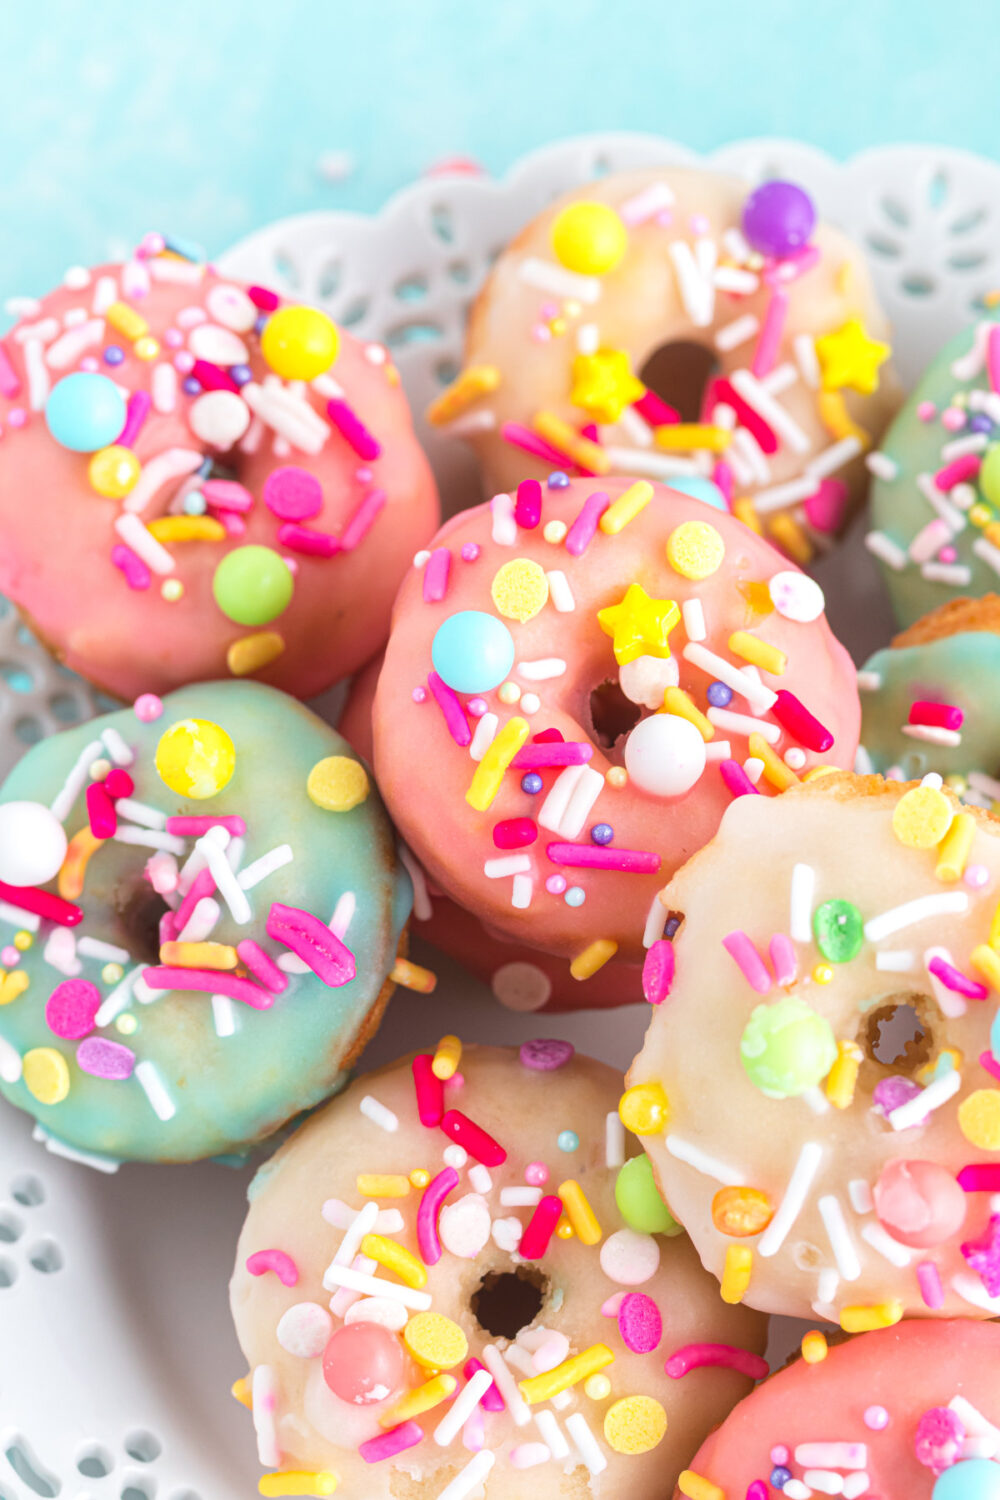 Mini donuts with colorful glaze and sprinkles. 